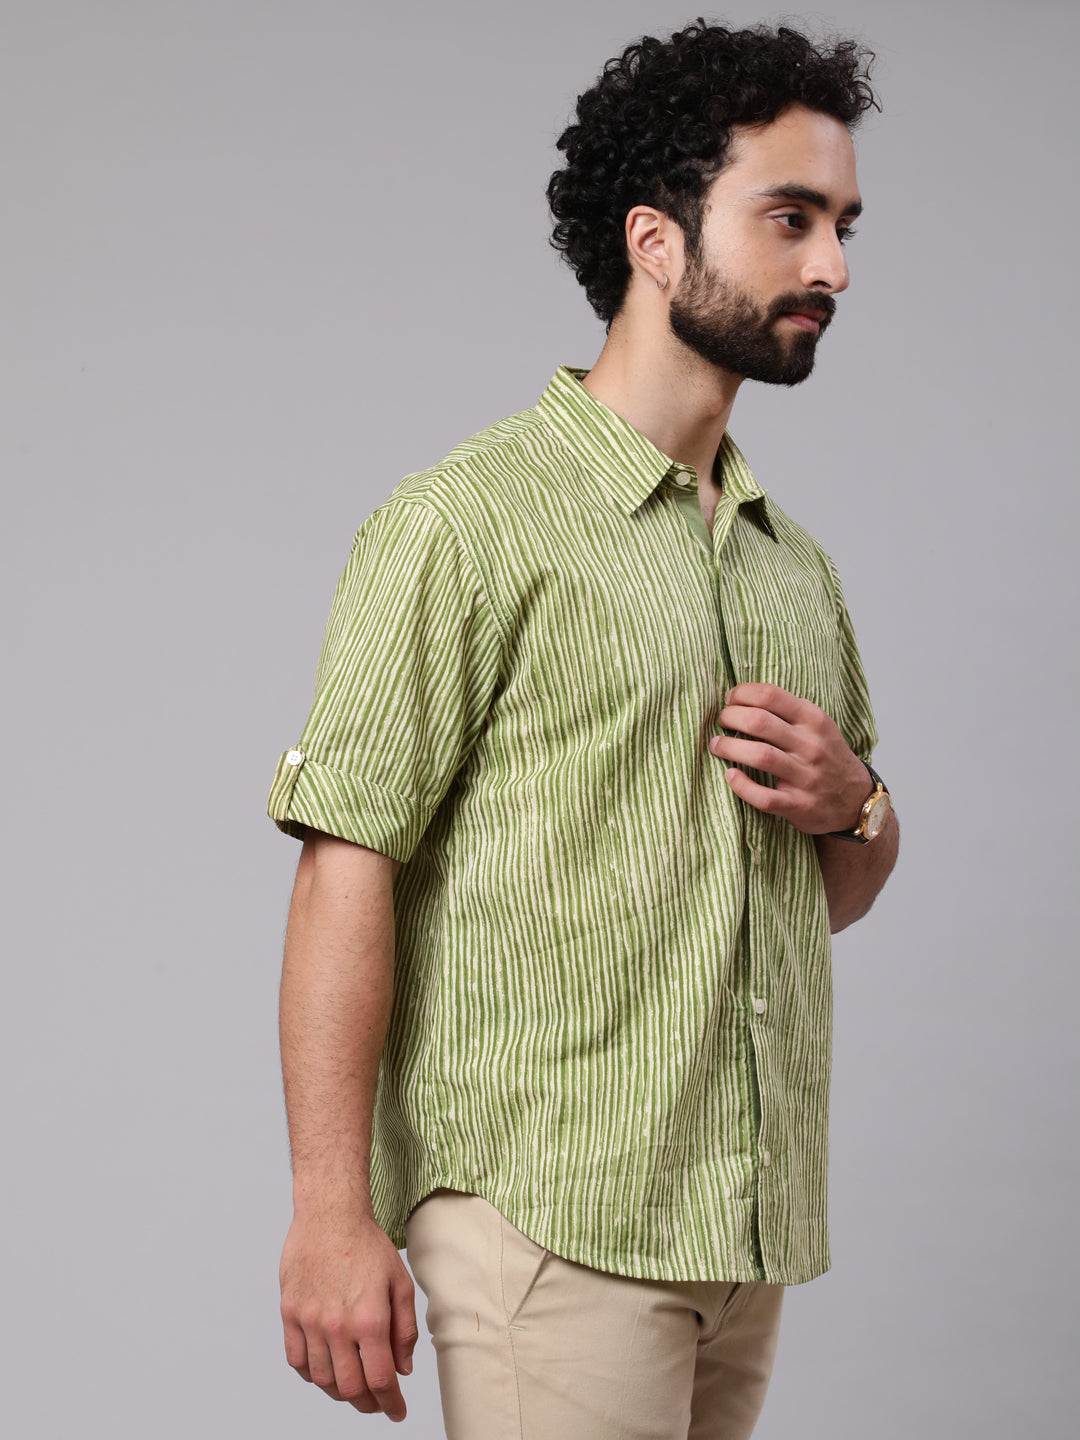 Men's Green Striped Shirt With Roll-Up Sleeve - Aks Men